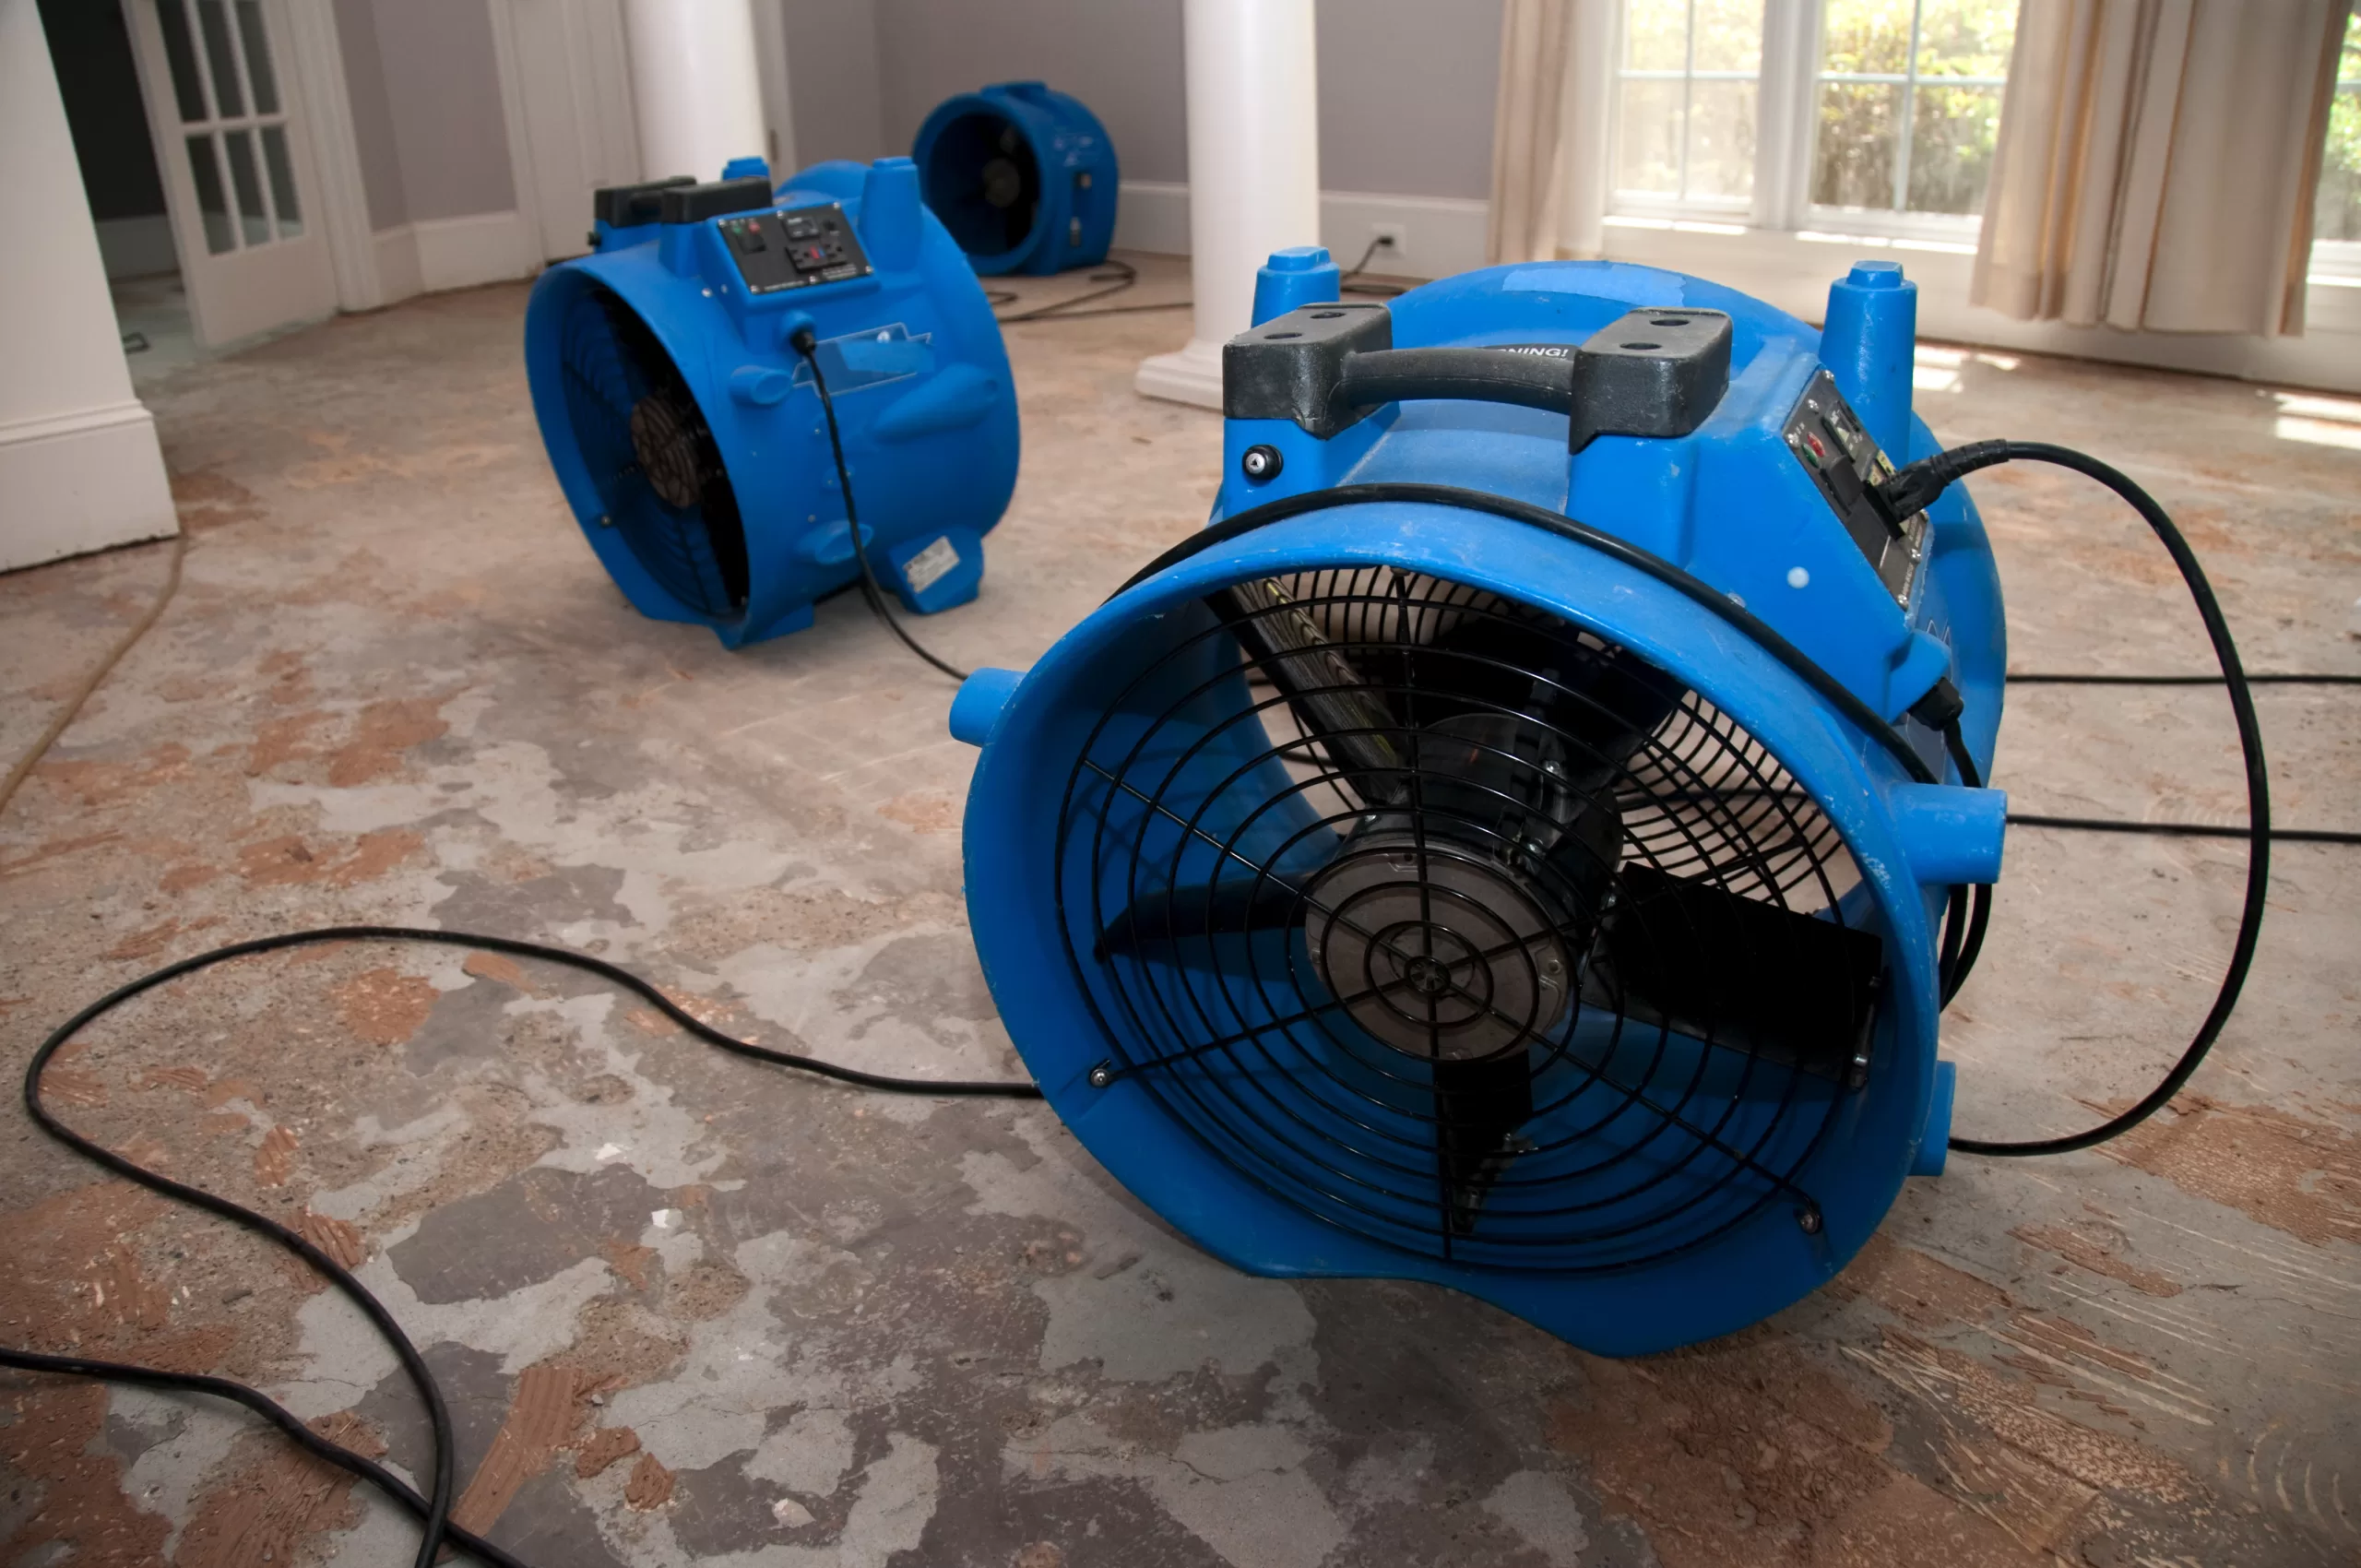 drying out a house after a flood, blowers in place to assist drying process